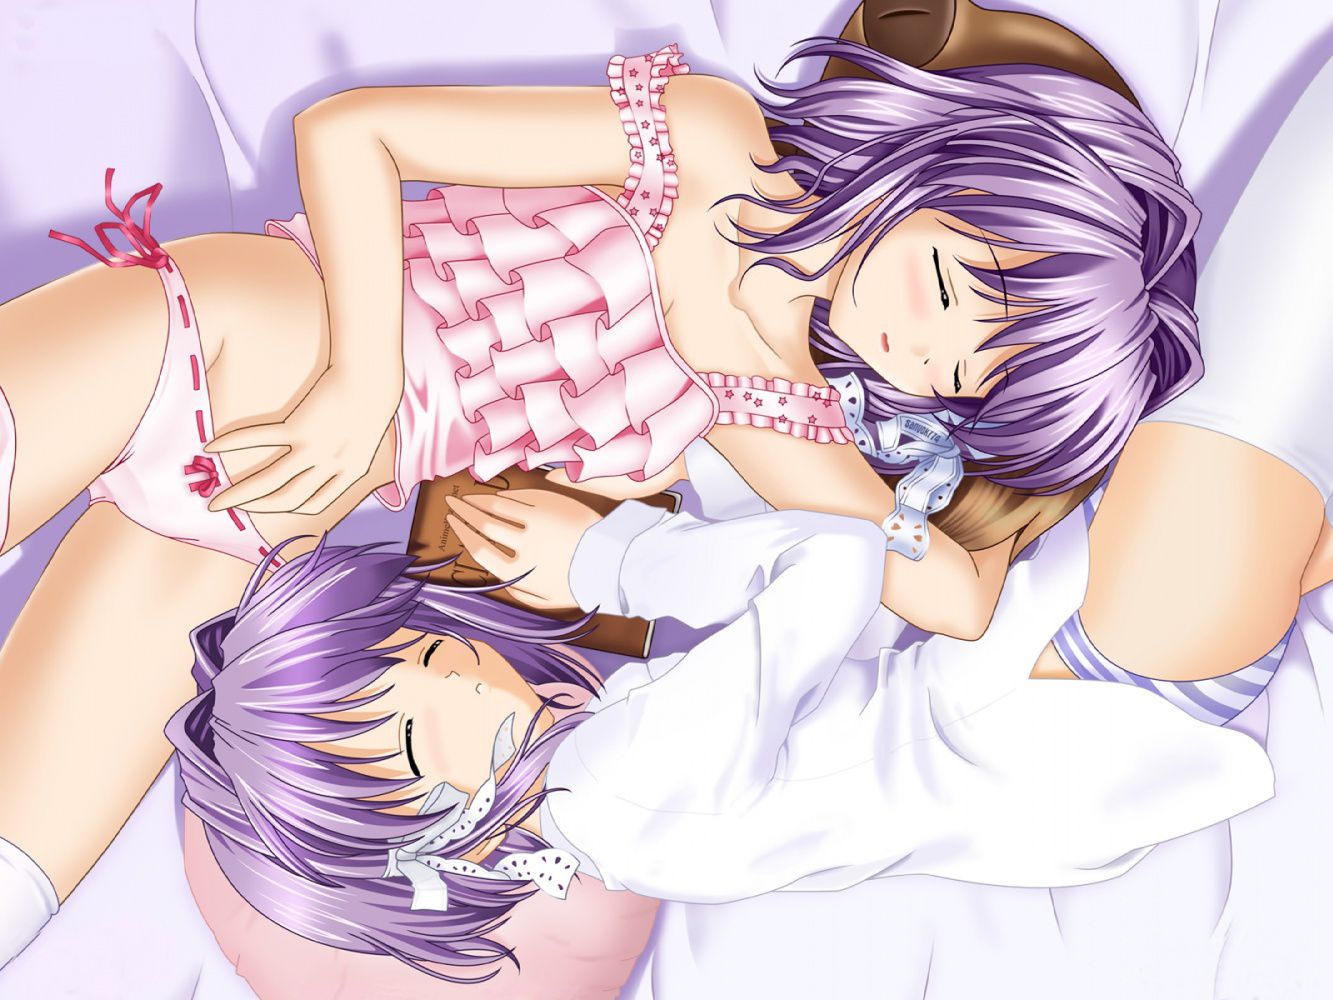 Yuri image once in a while I see with other girls too! 18